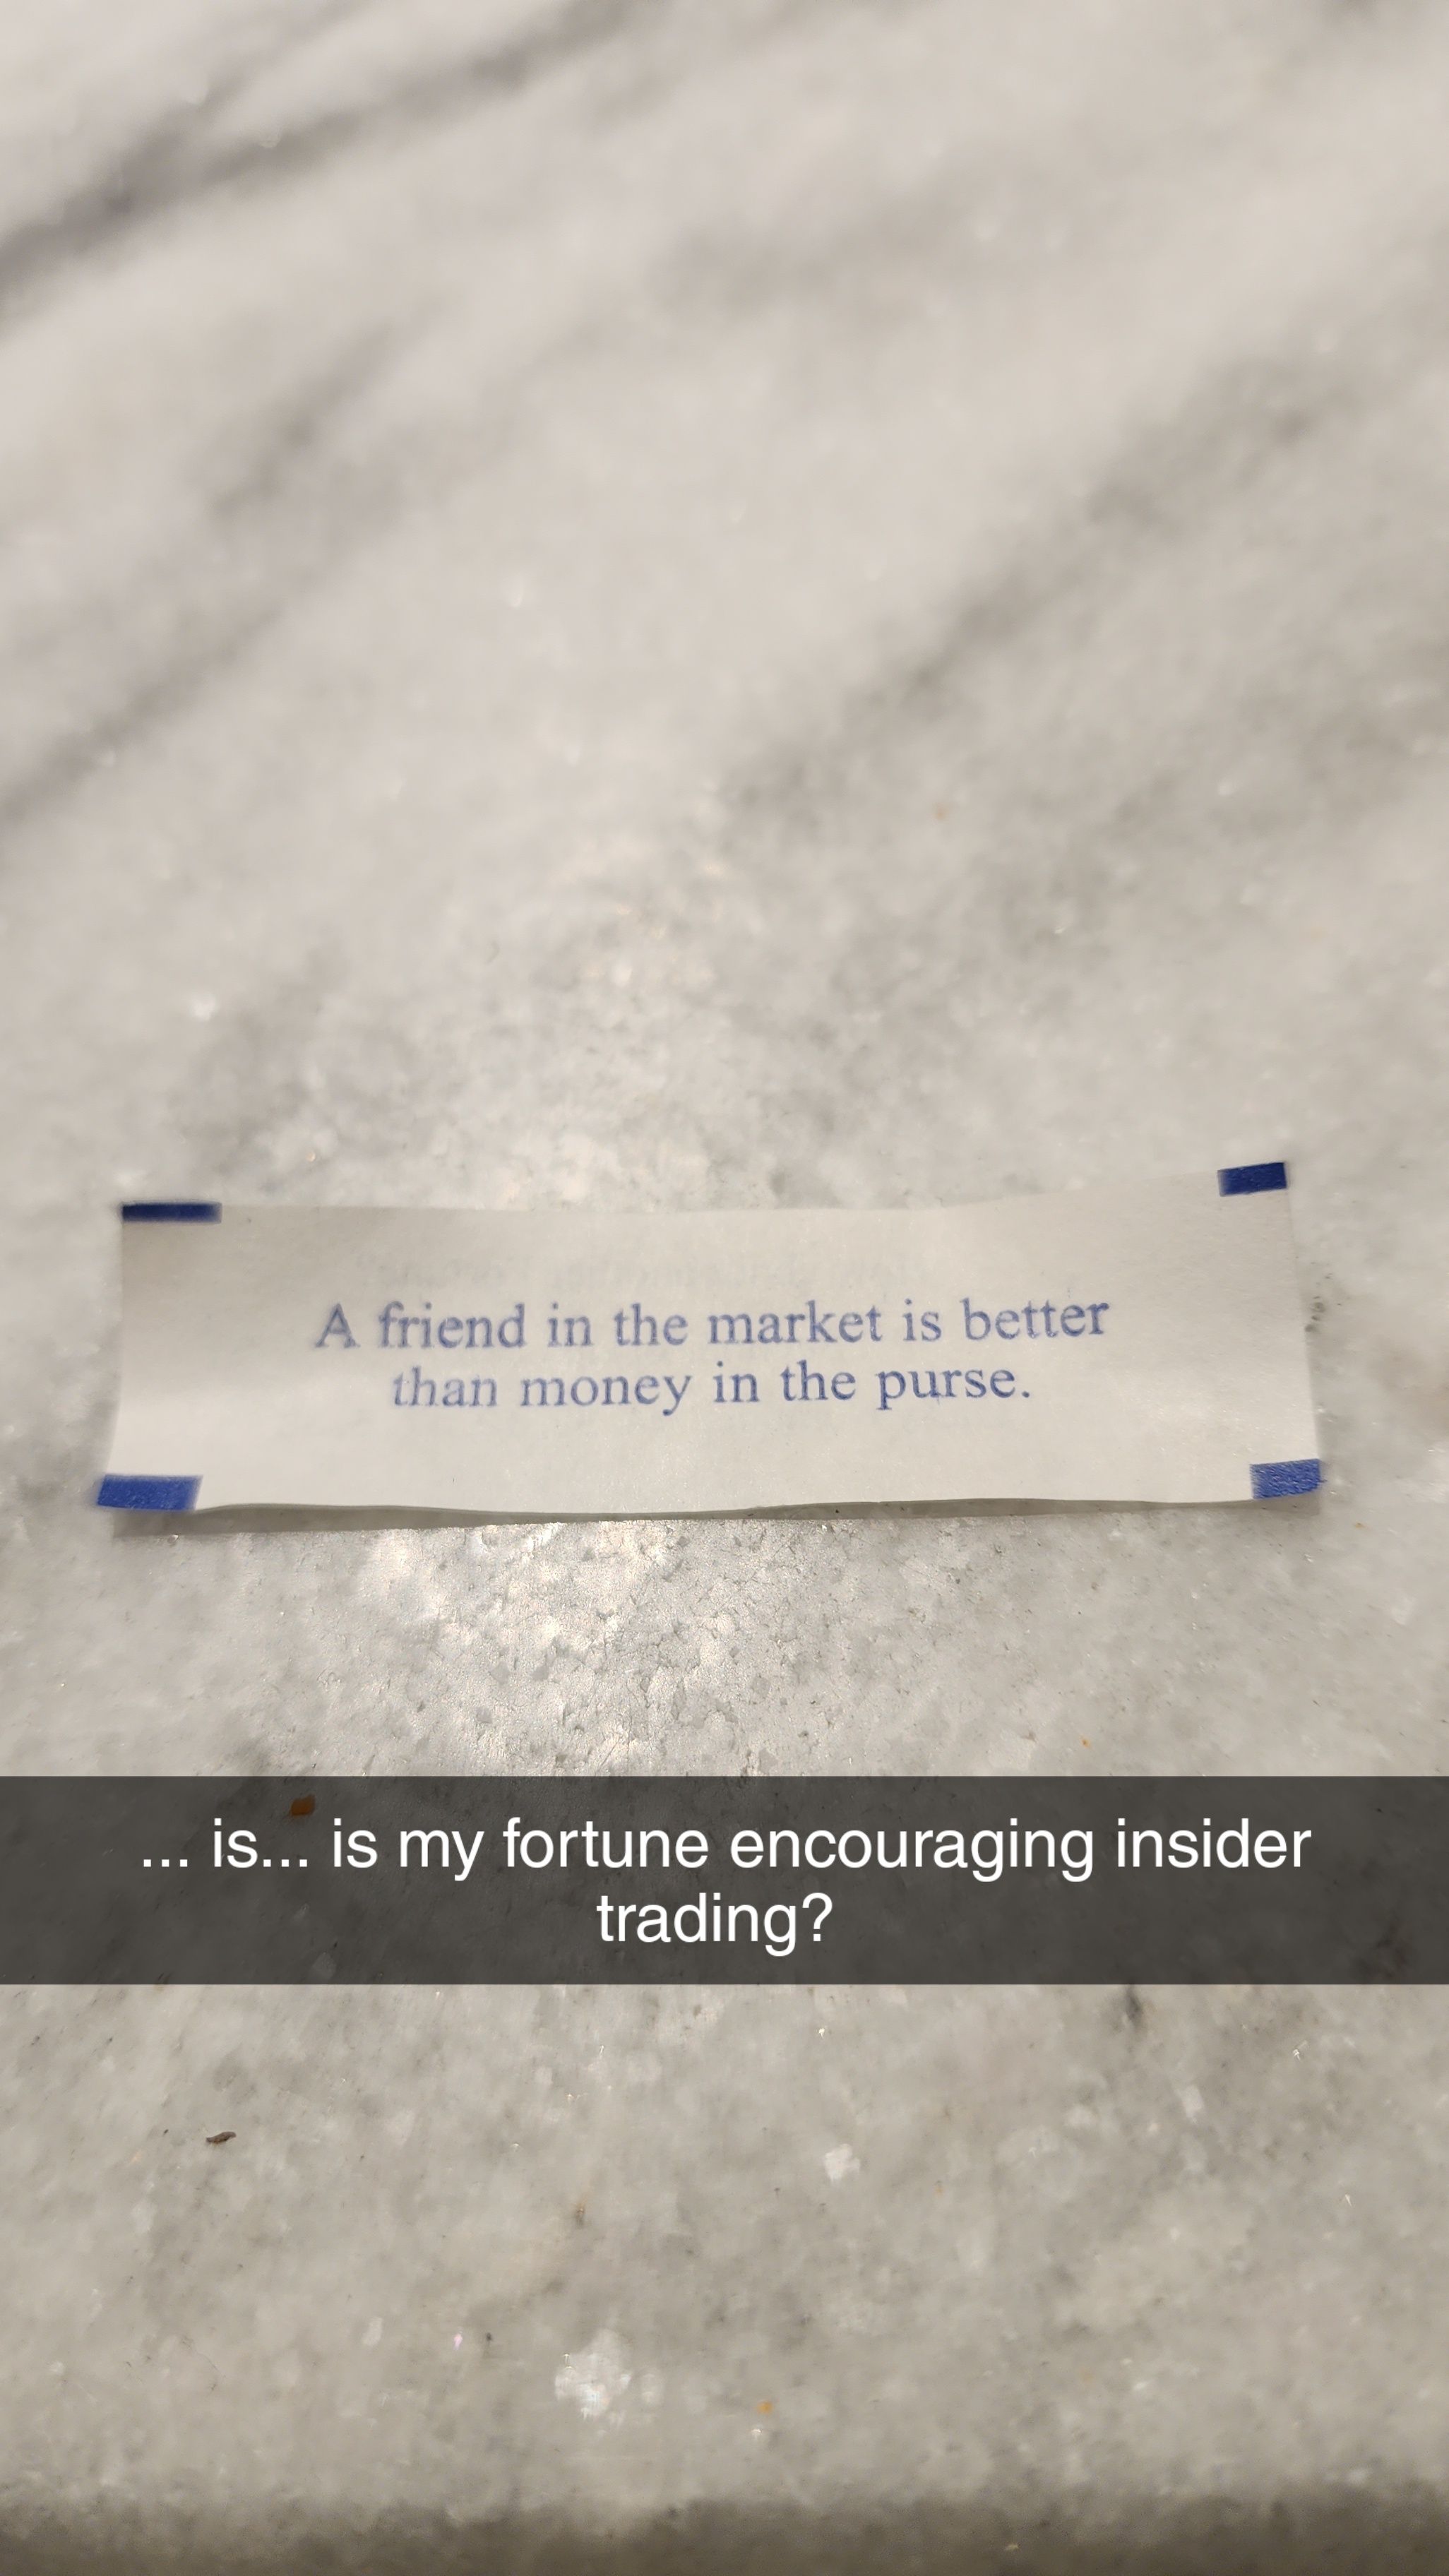 ... is... is my fortune encouraging insider trading?